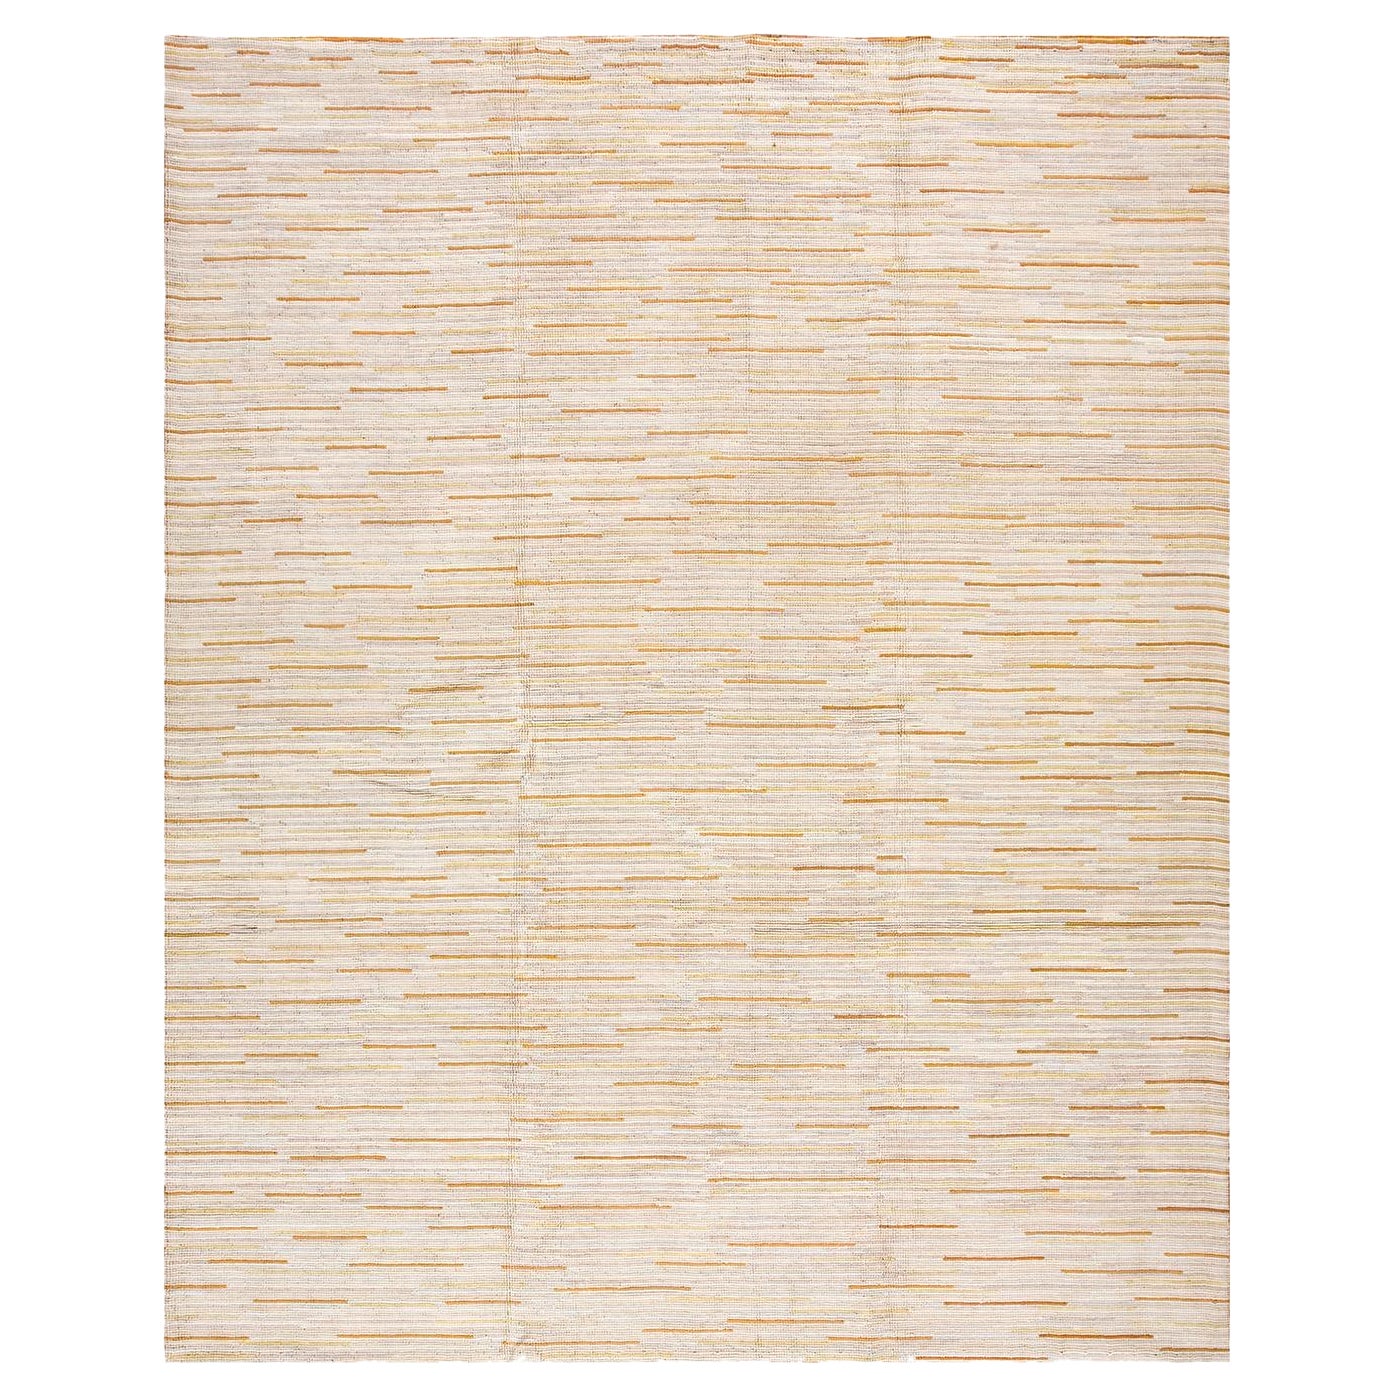 Contemporary American Cotton Hooked Rug (6' x 9' 183 x 274 cm) For Sale